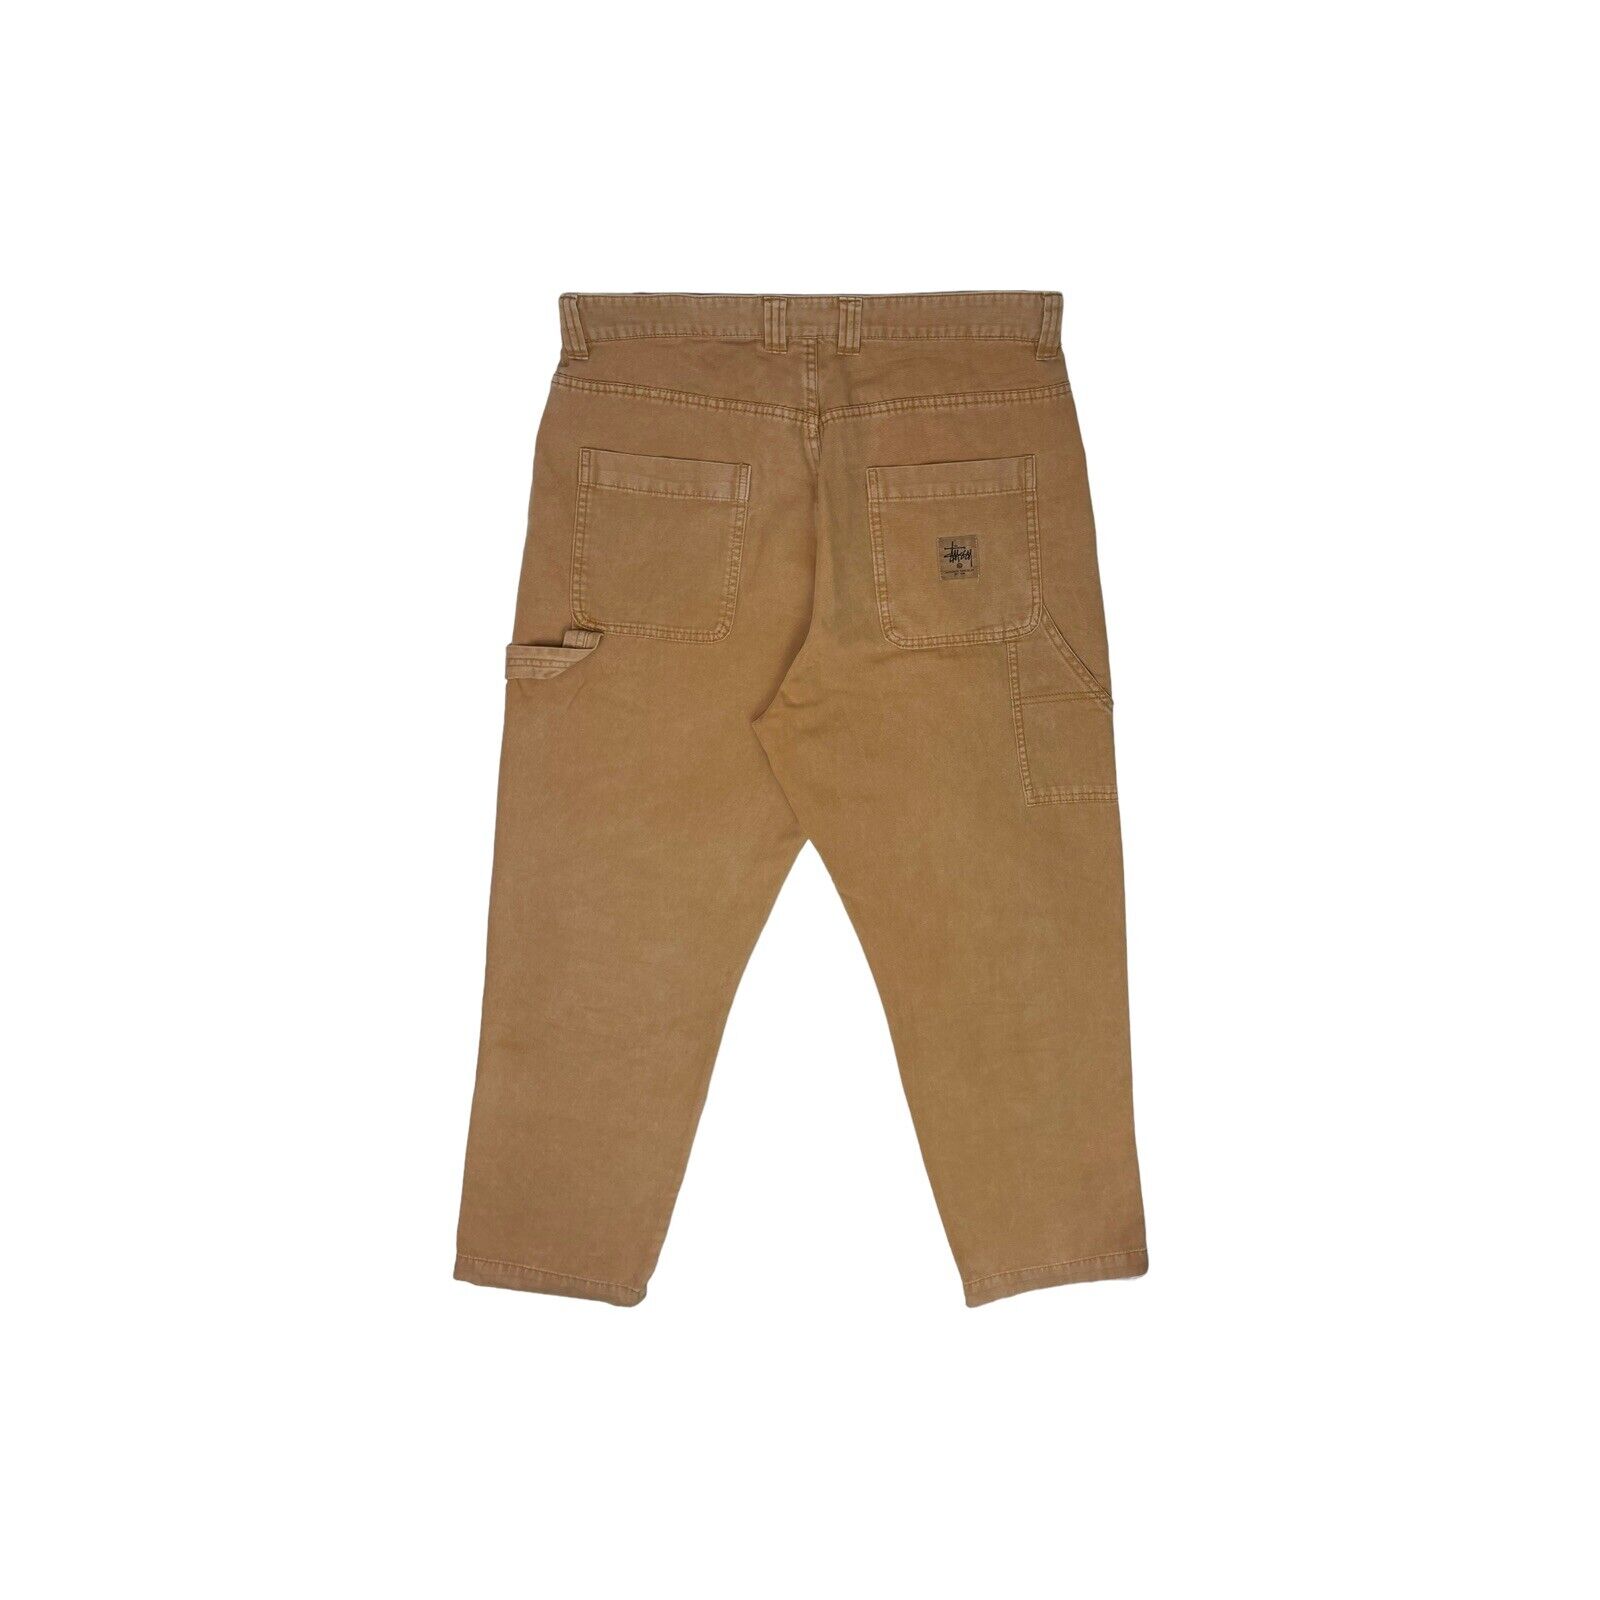 Stussy Washed Canvas Work Pant Gold Brown Mens 32w 29l